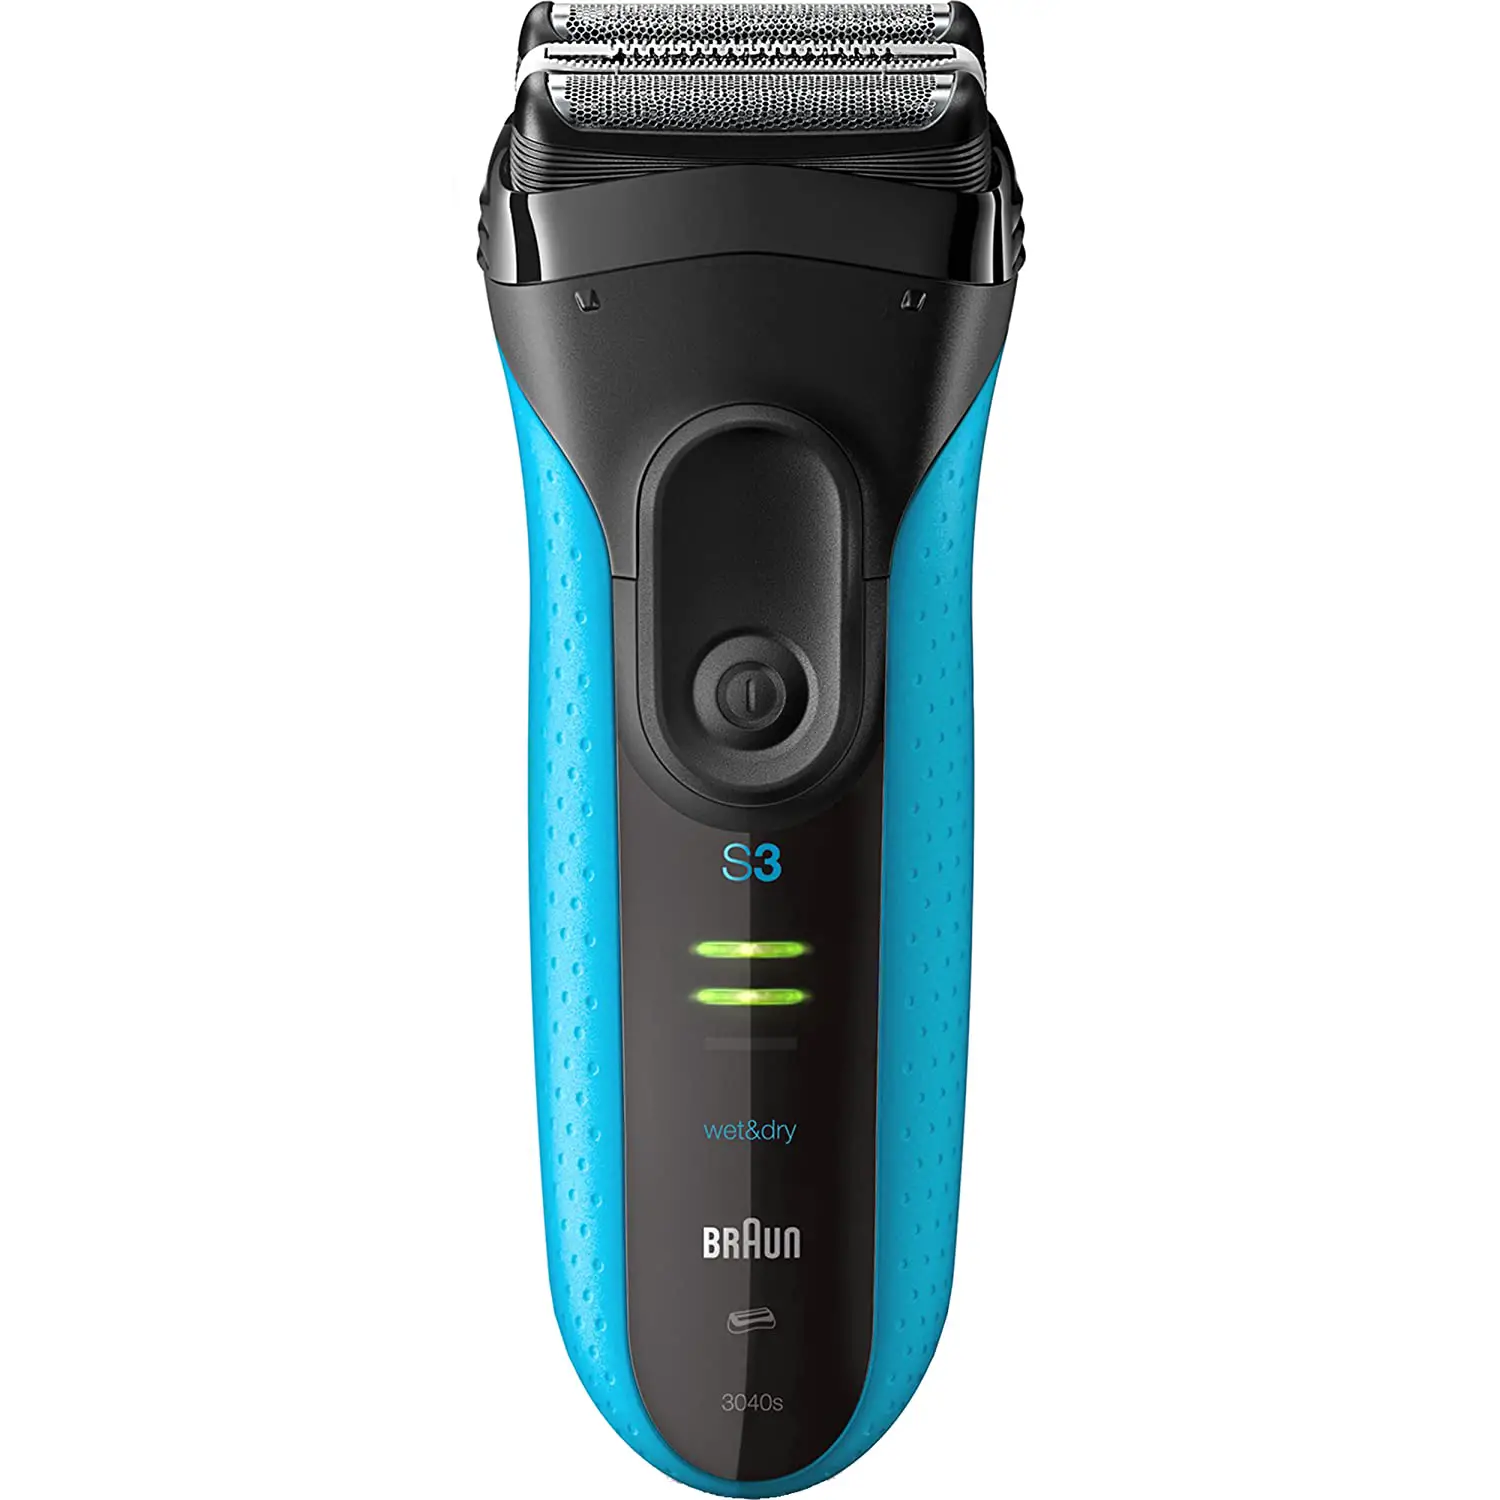 Braun Electric Series 3 Razor with Precision Trimmer, Rechargeable, Wet & Dry Foil Shaver for Men, Blue:Black, 4 Piece shavers for African American men